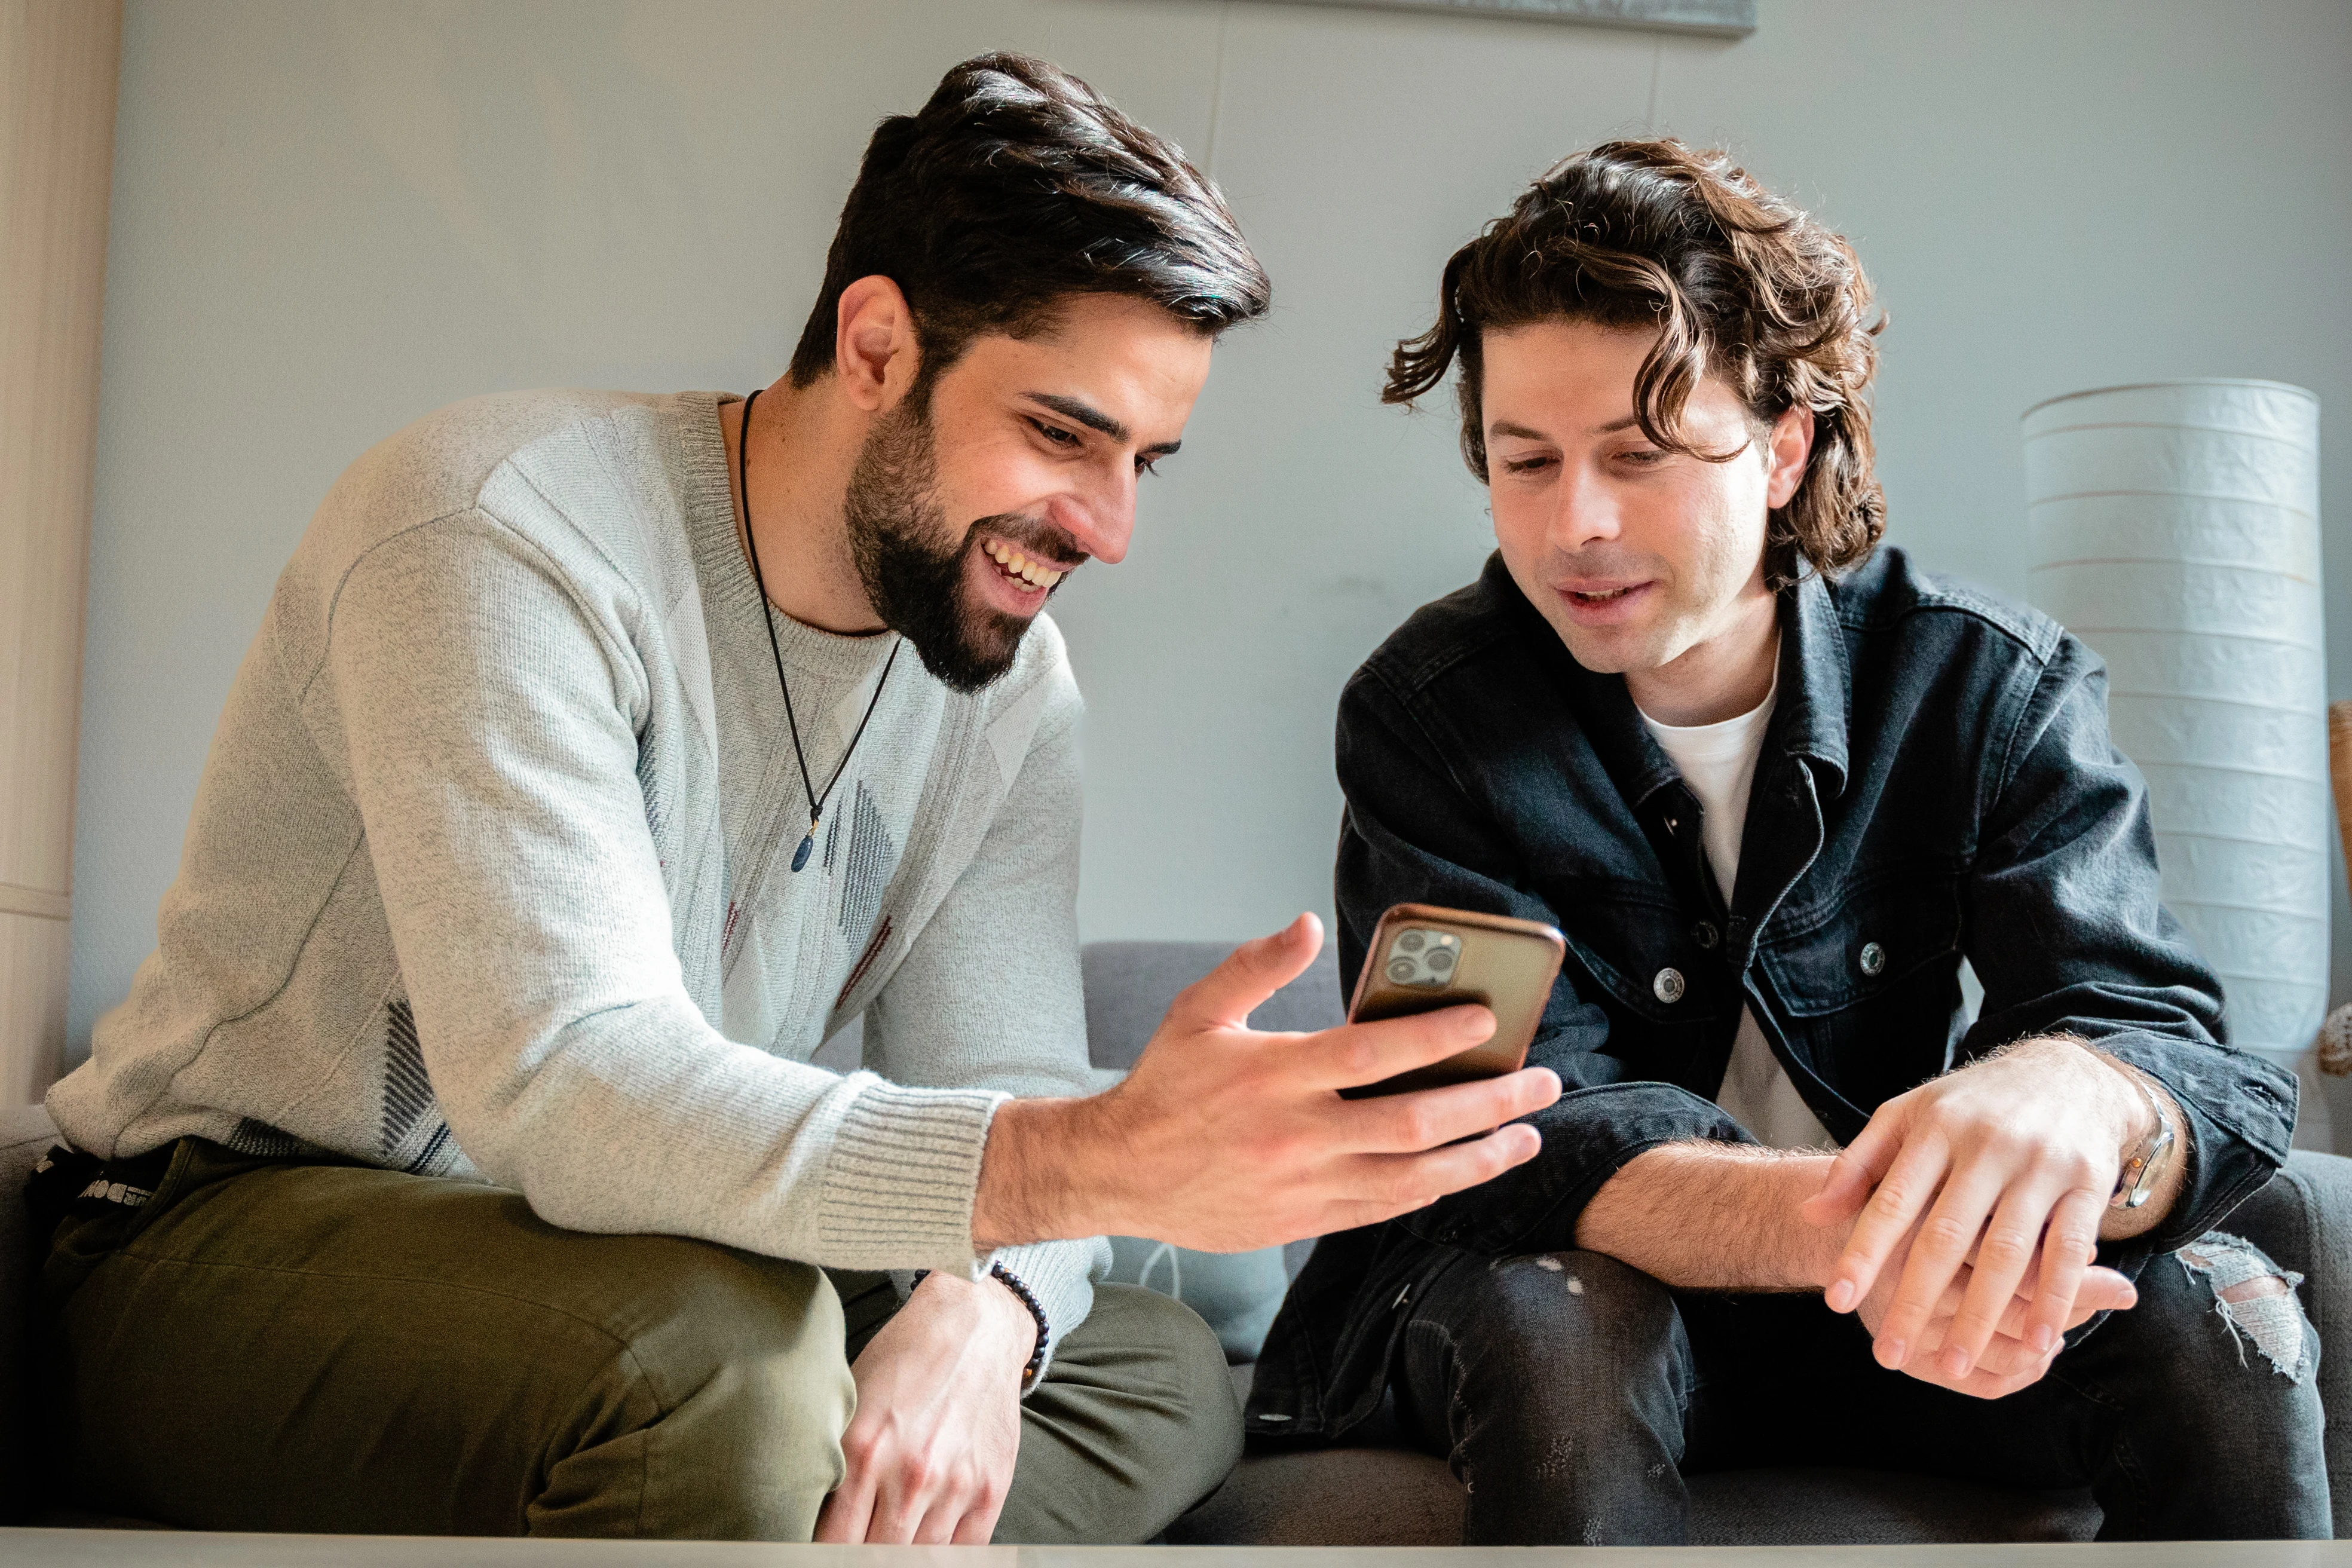 Two men look at the RefugeeHelp website on their phones.